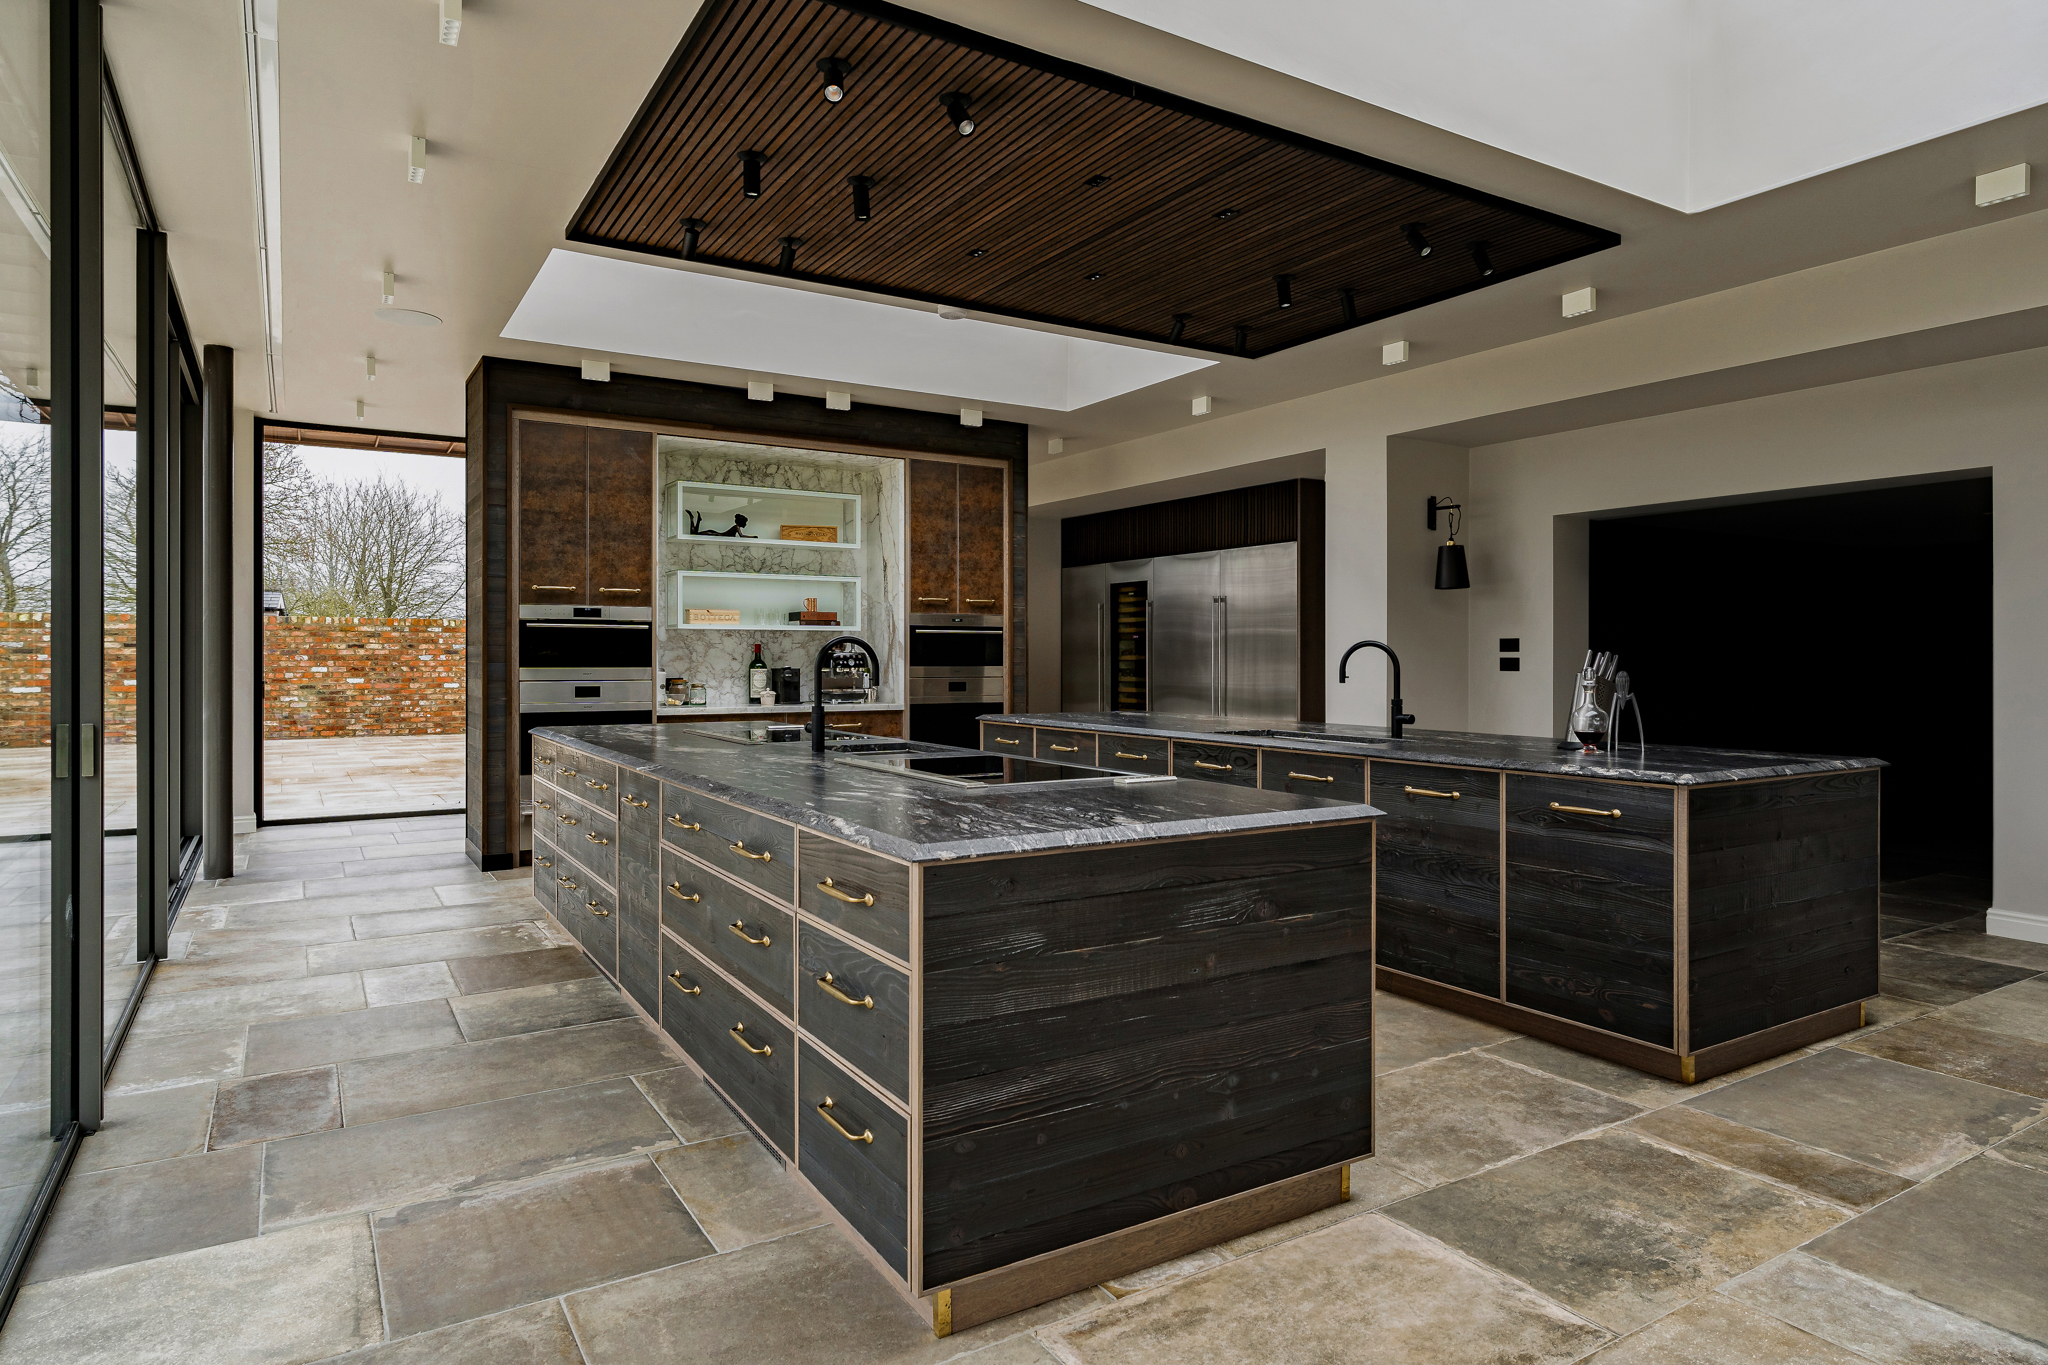 A wide angle image of a bespoke rustic english kitchen with two islands